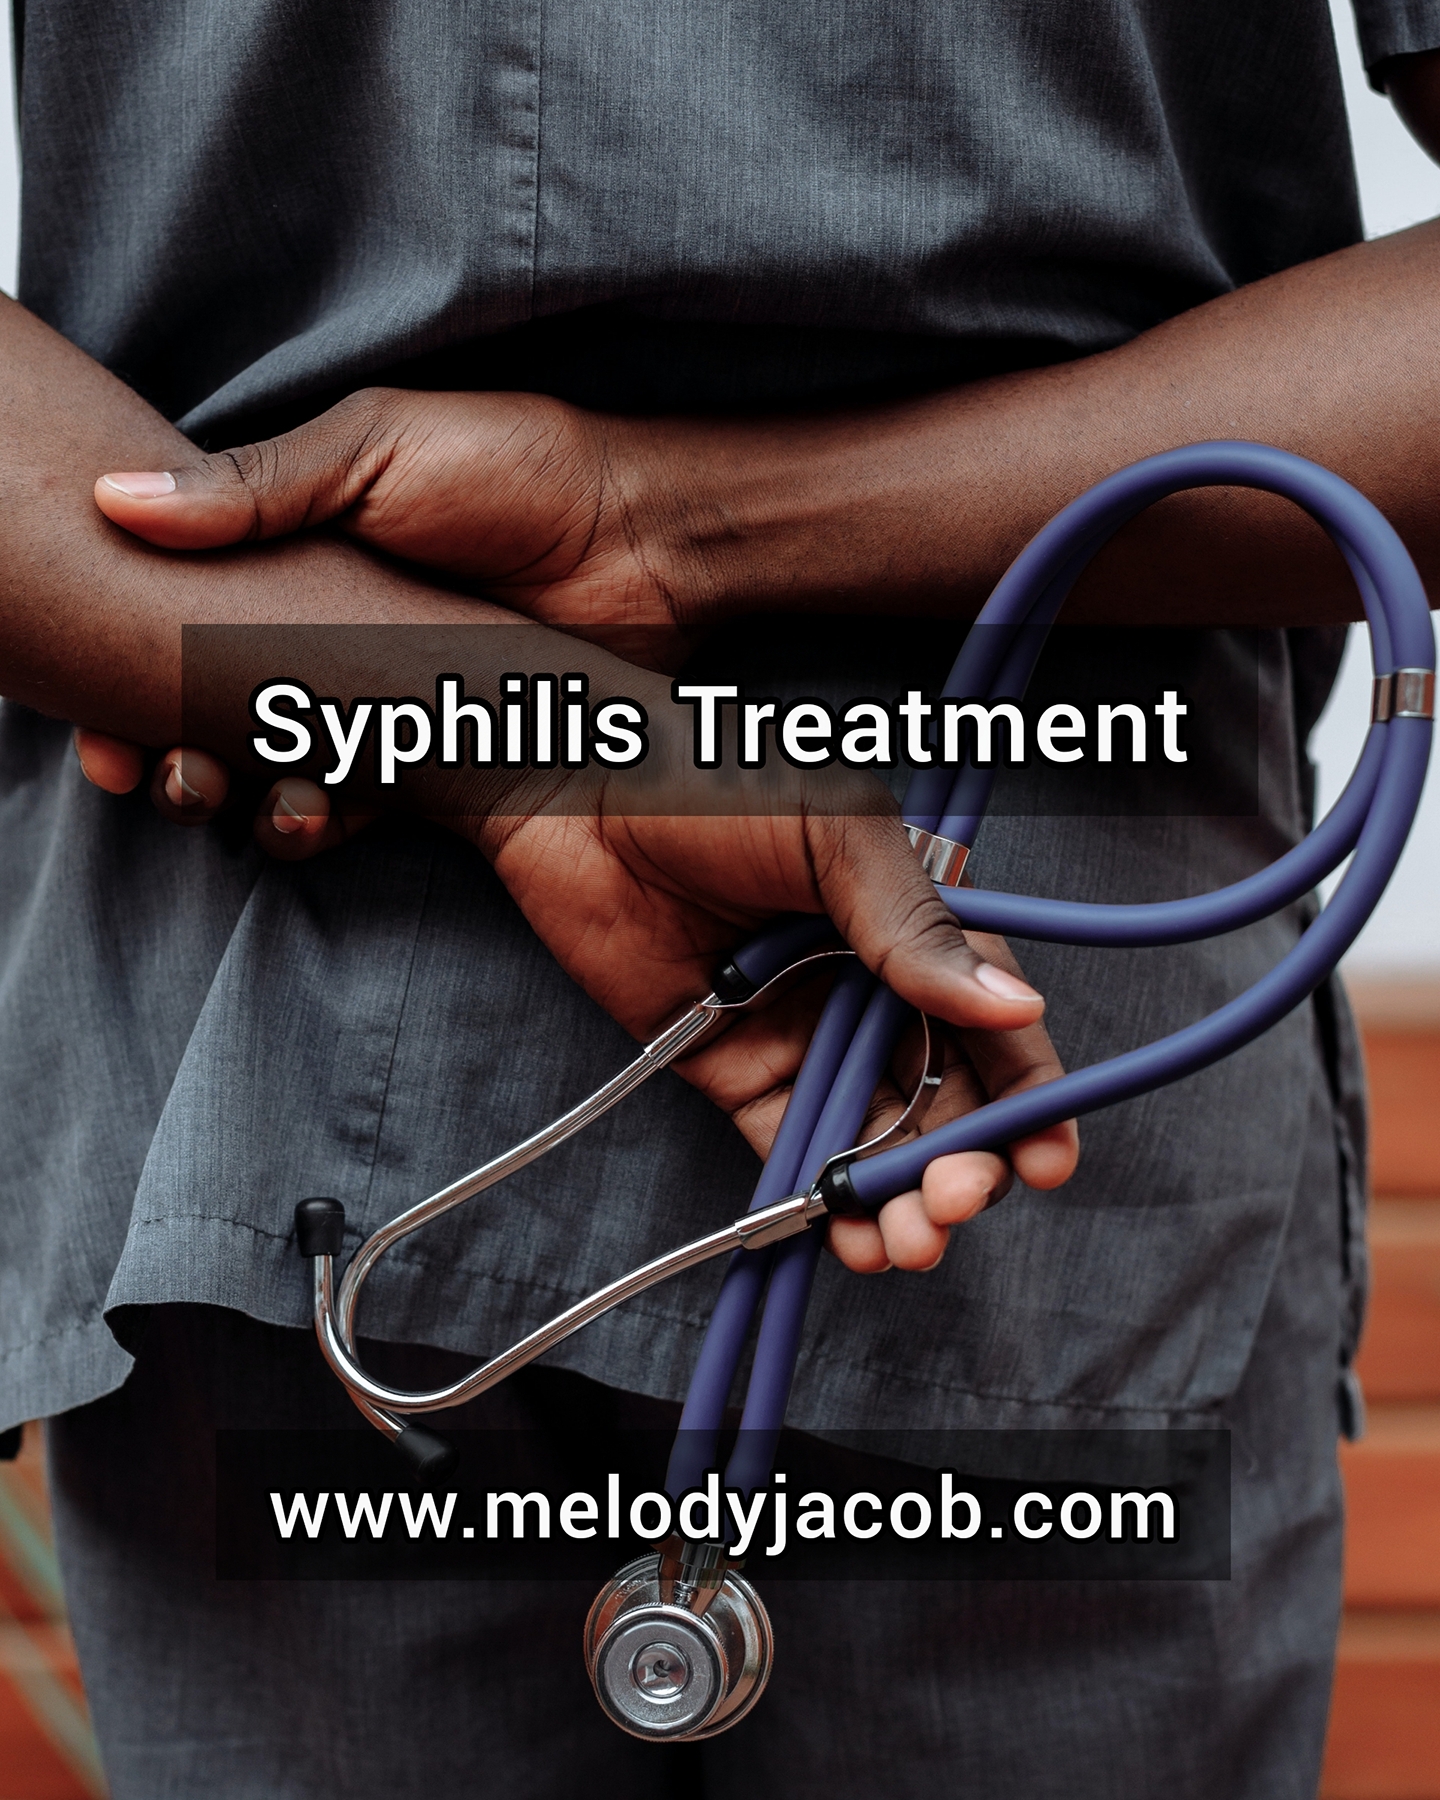 Syphilis Symptoms Causes And Treatment Melody Jacob